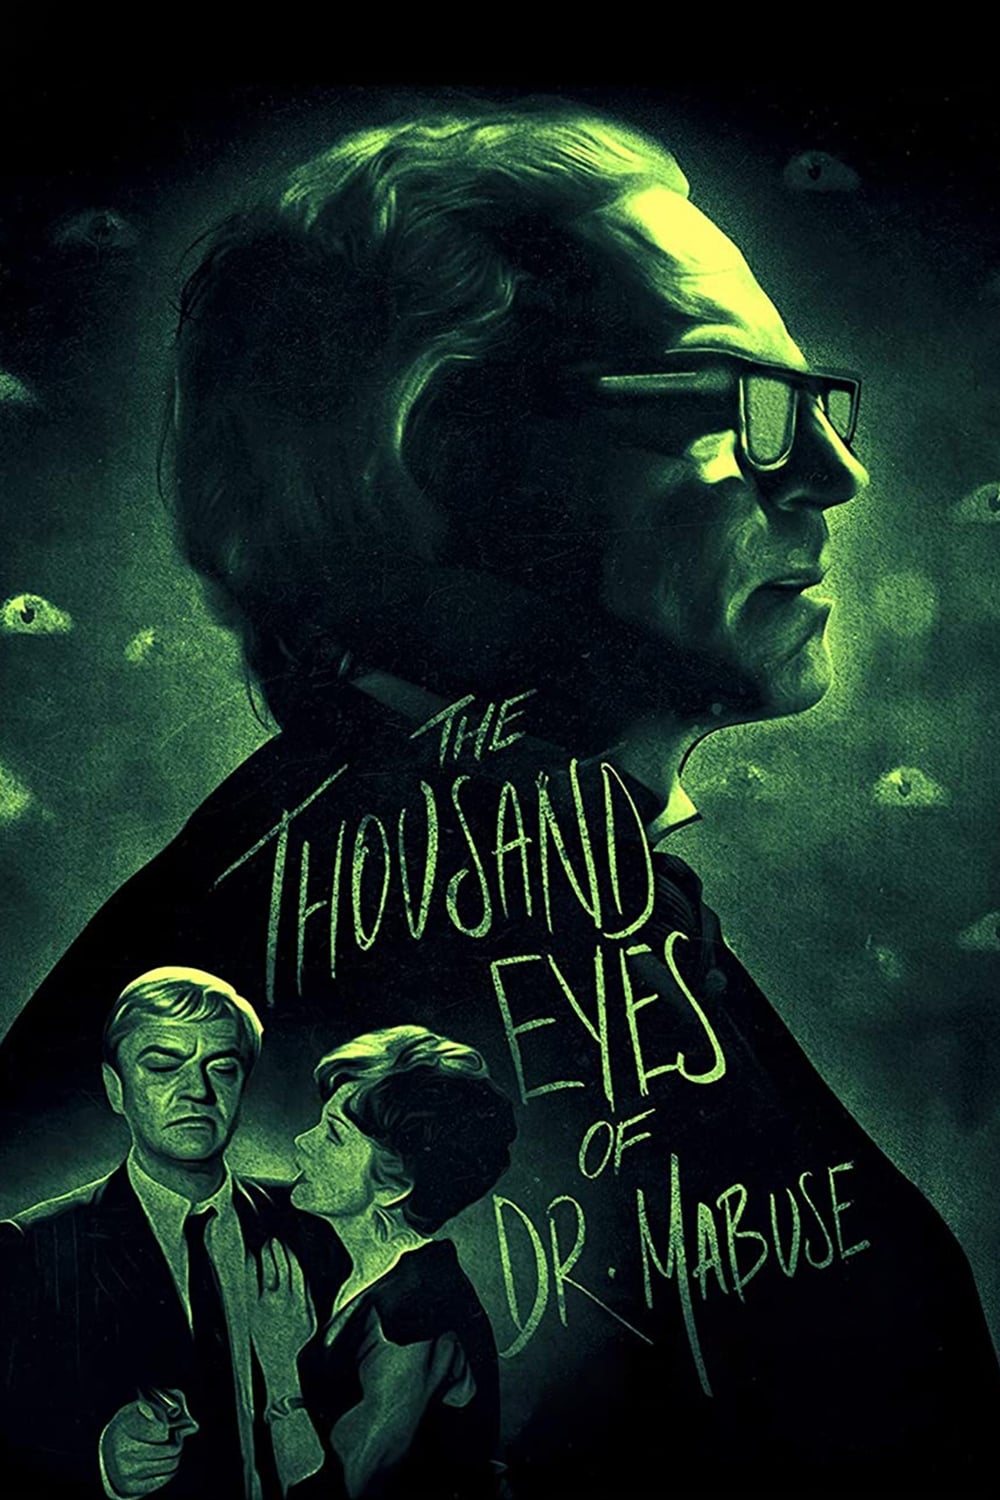 The Thousand Eyes Of Dr Mabuse